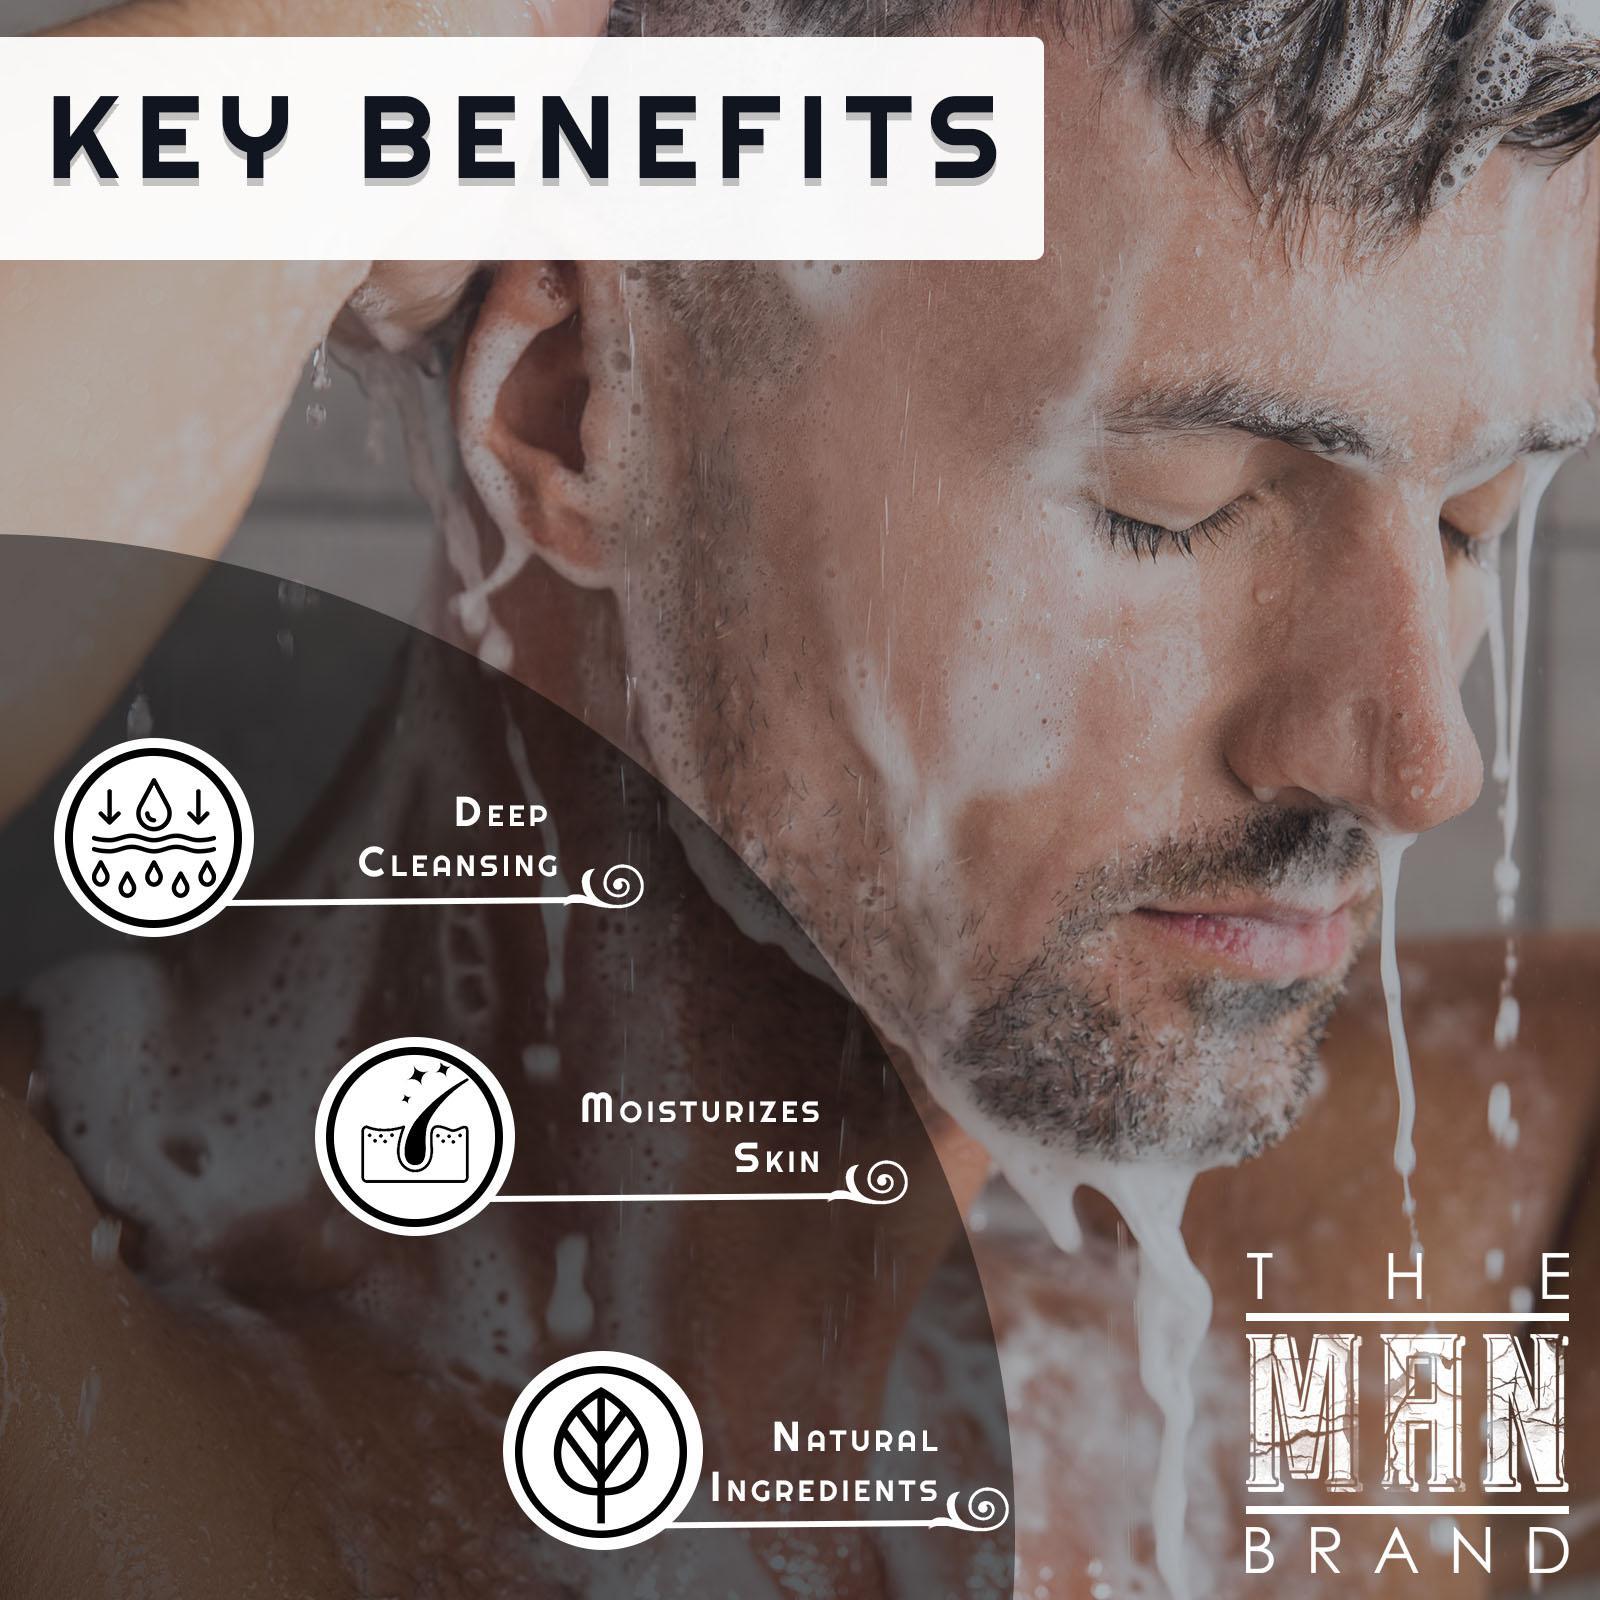 Men's Skin Grooming Kit: Body Lotion, Body Wash, and Solid Cologne